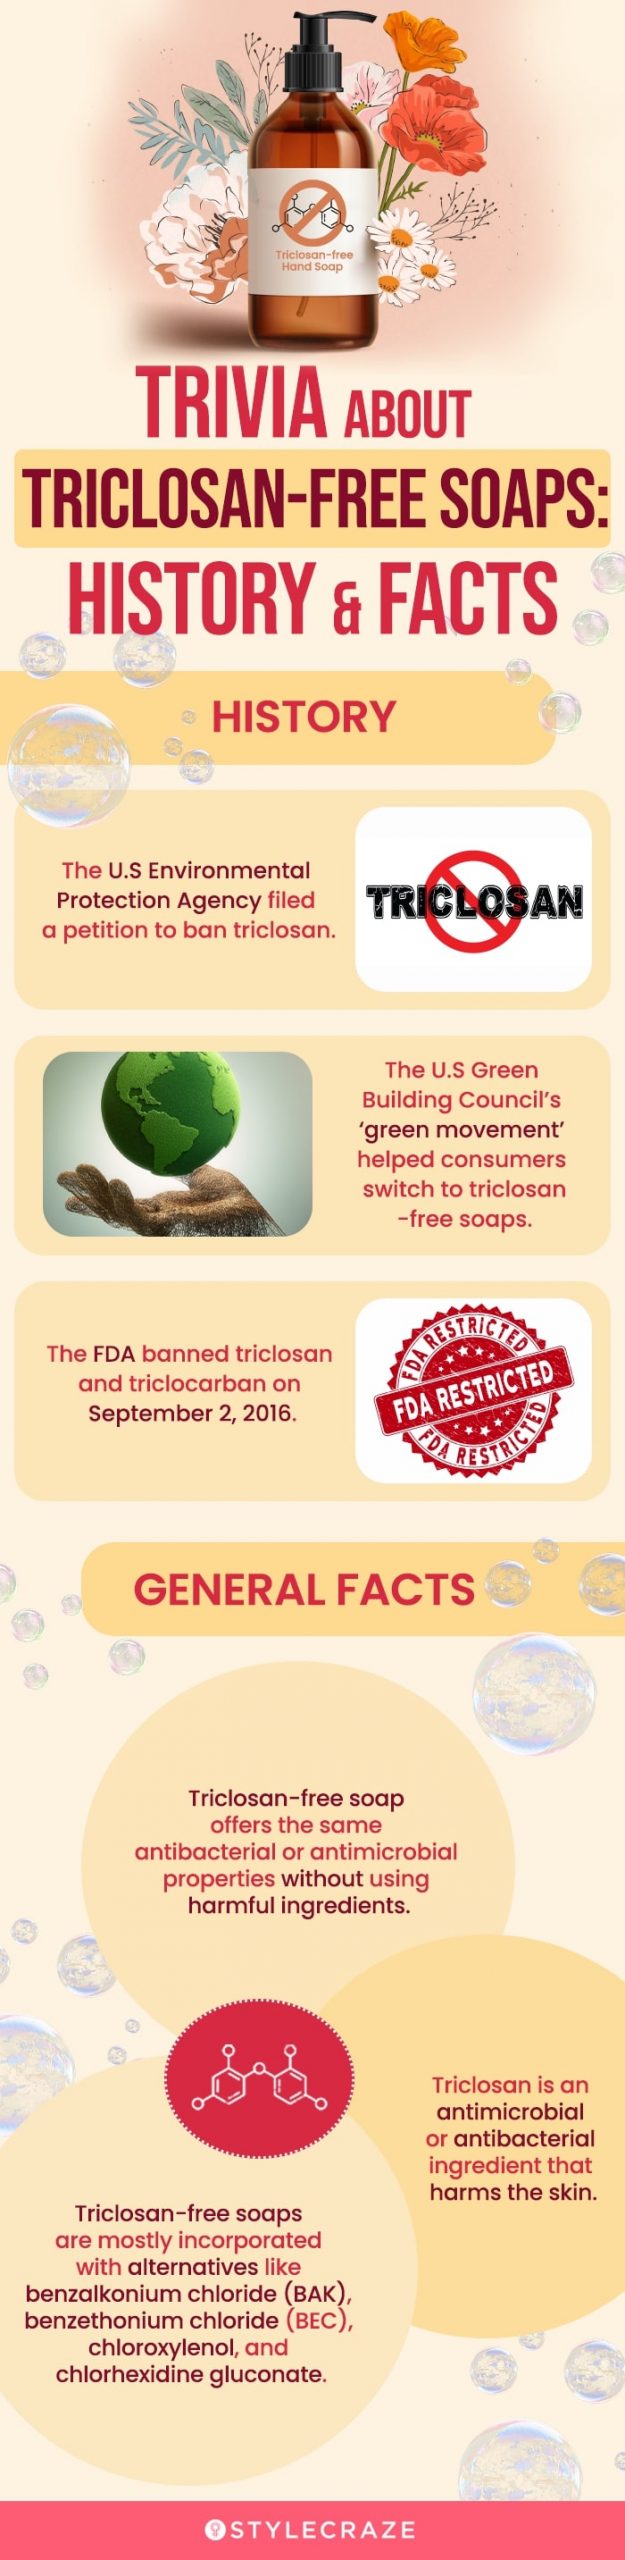 Trivia About Triclosan-Free Soaps: History & Facts [infographic]